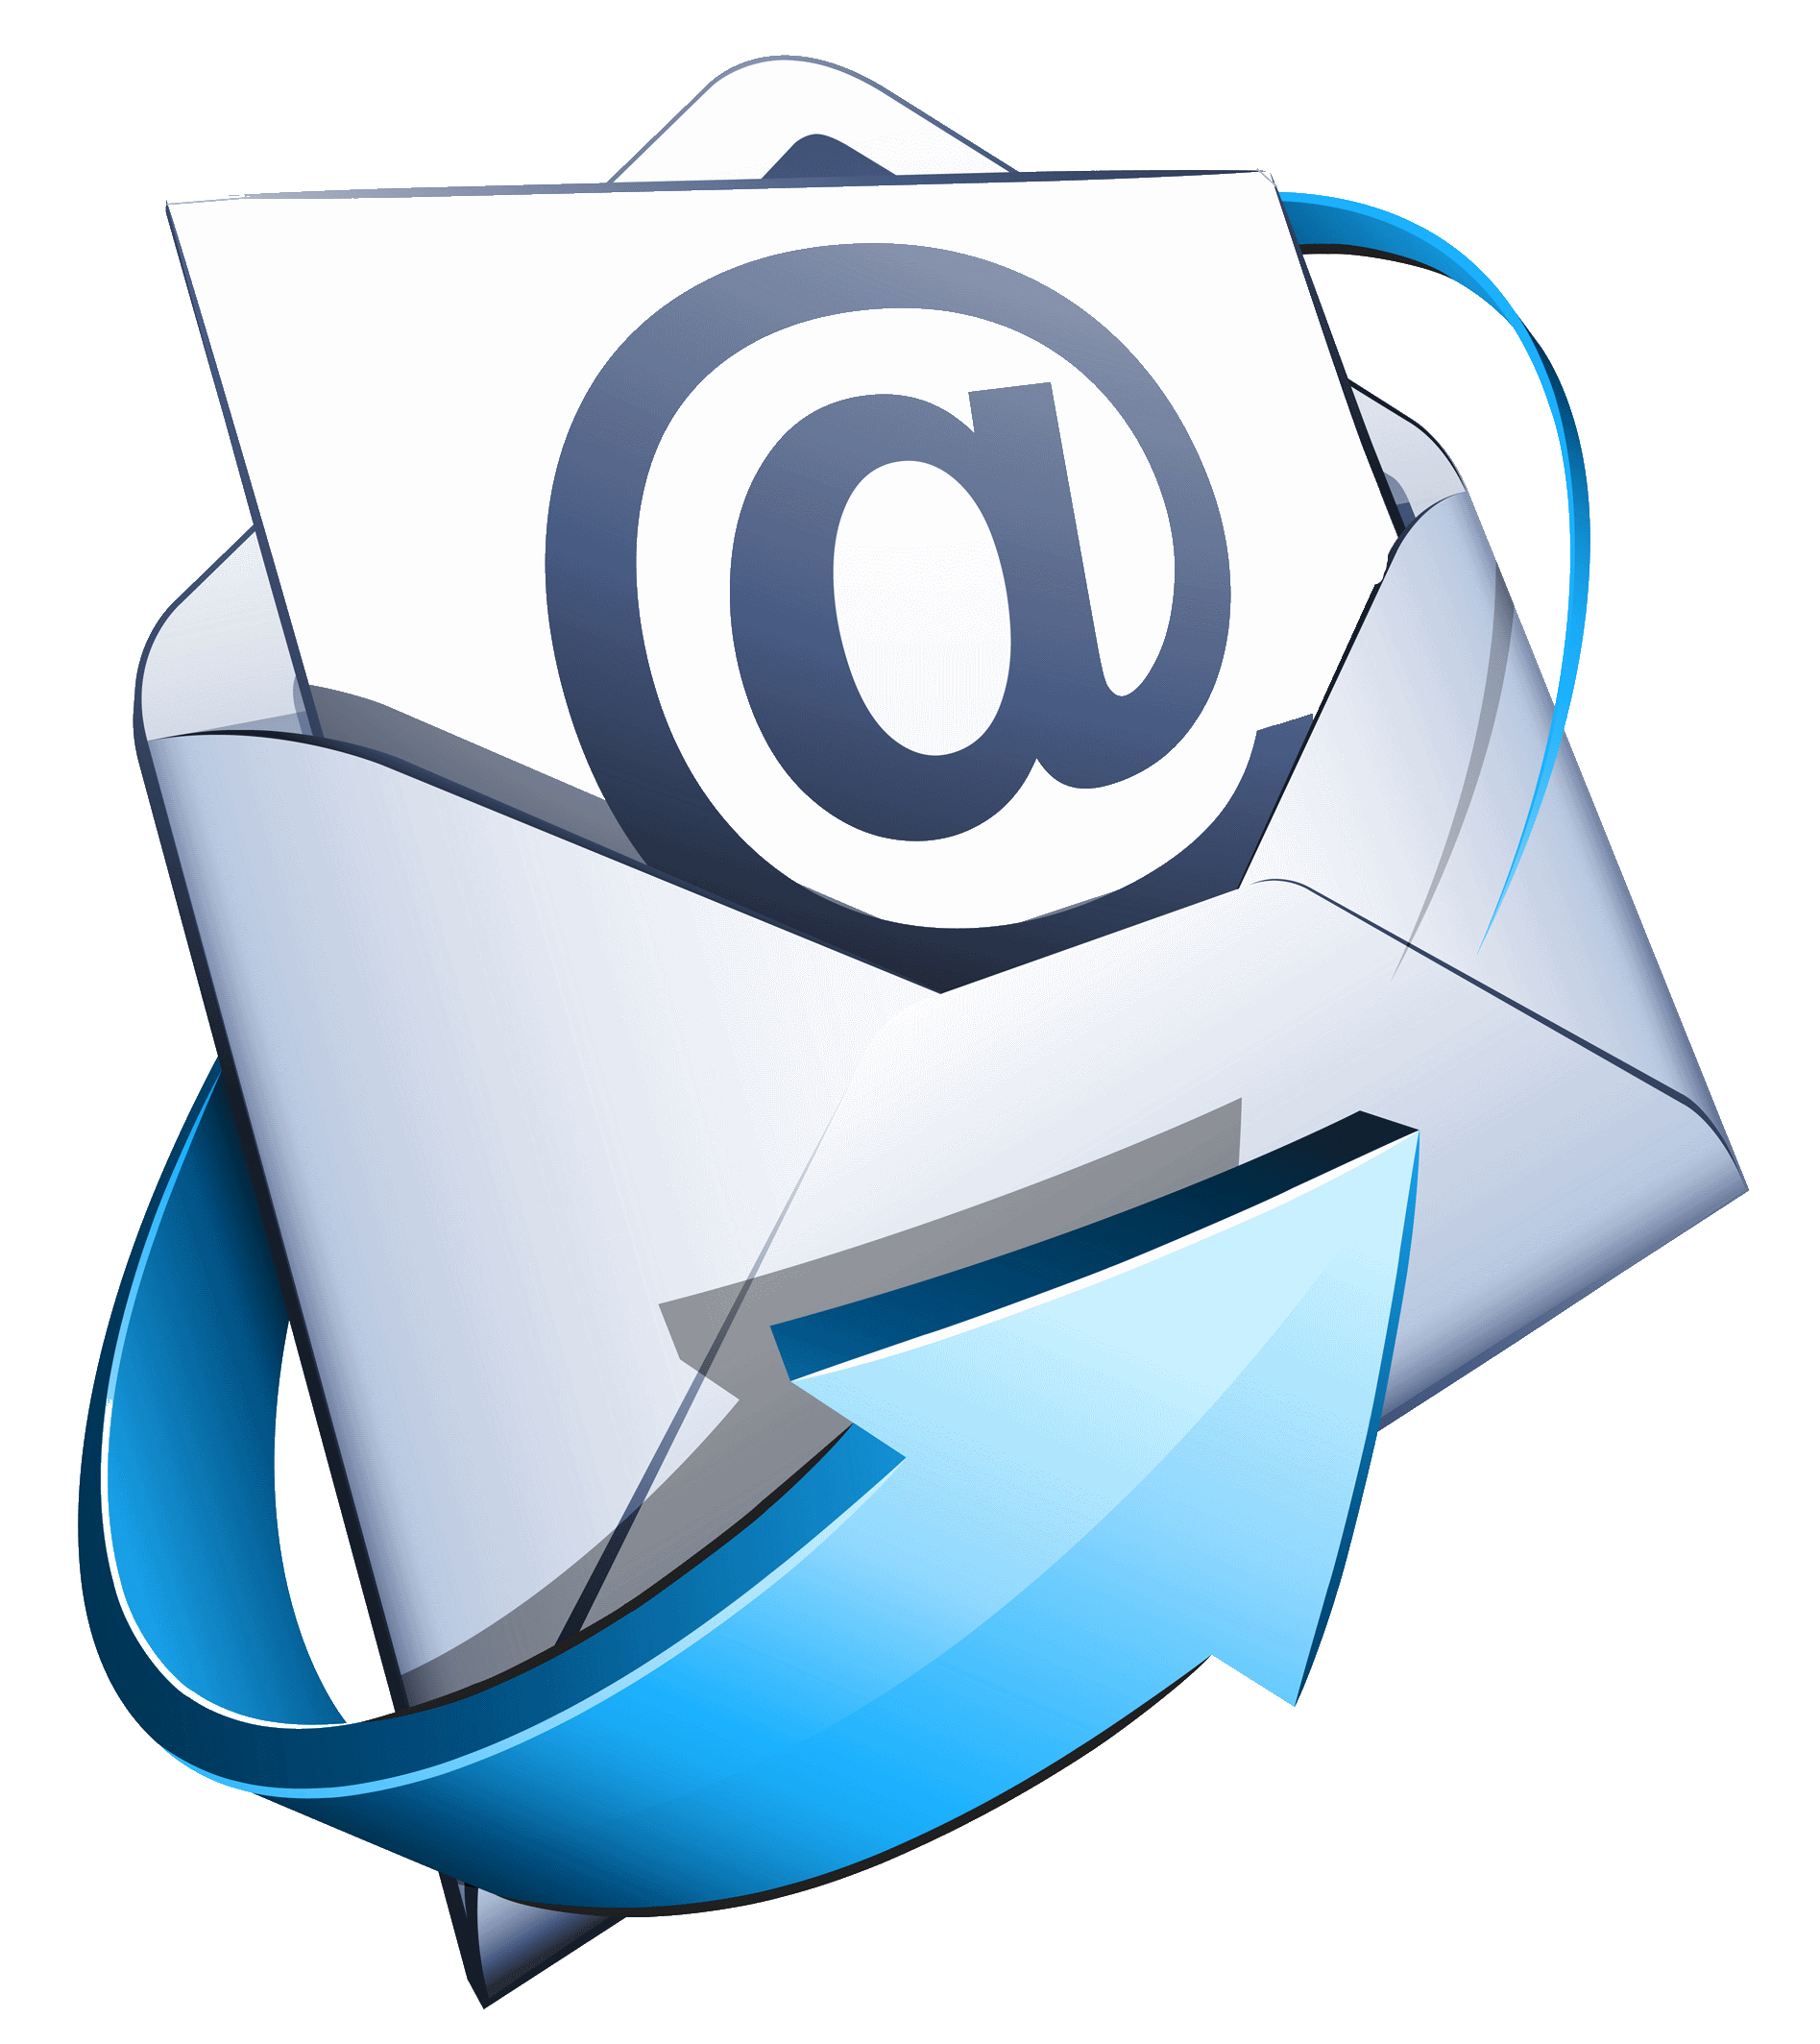 email icon clip art free - photo #34